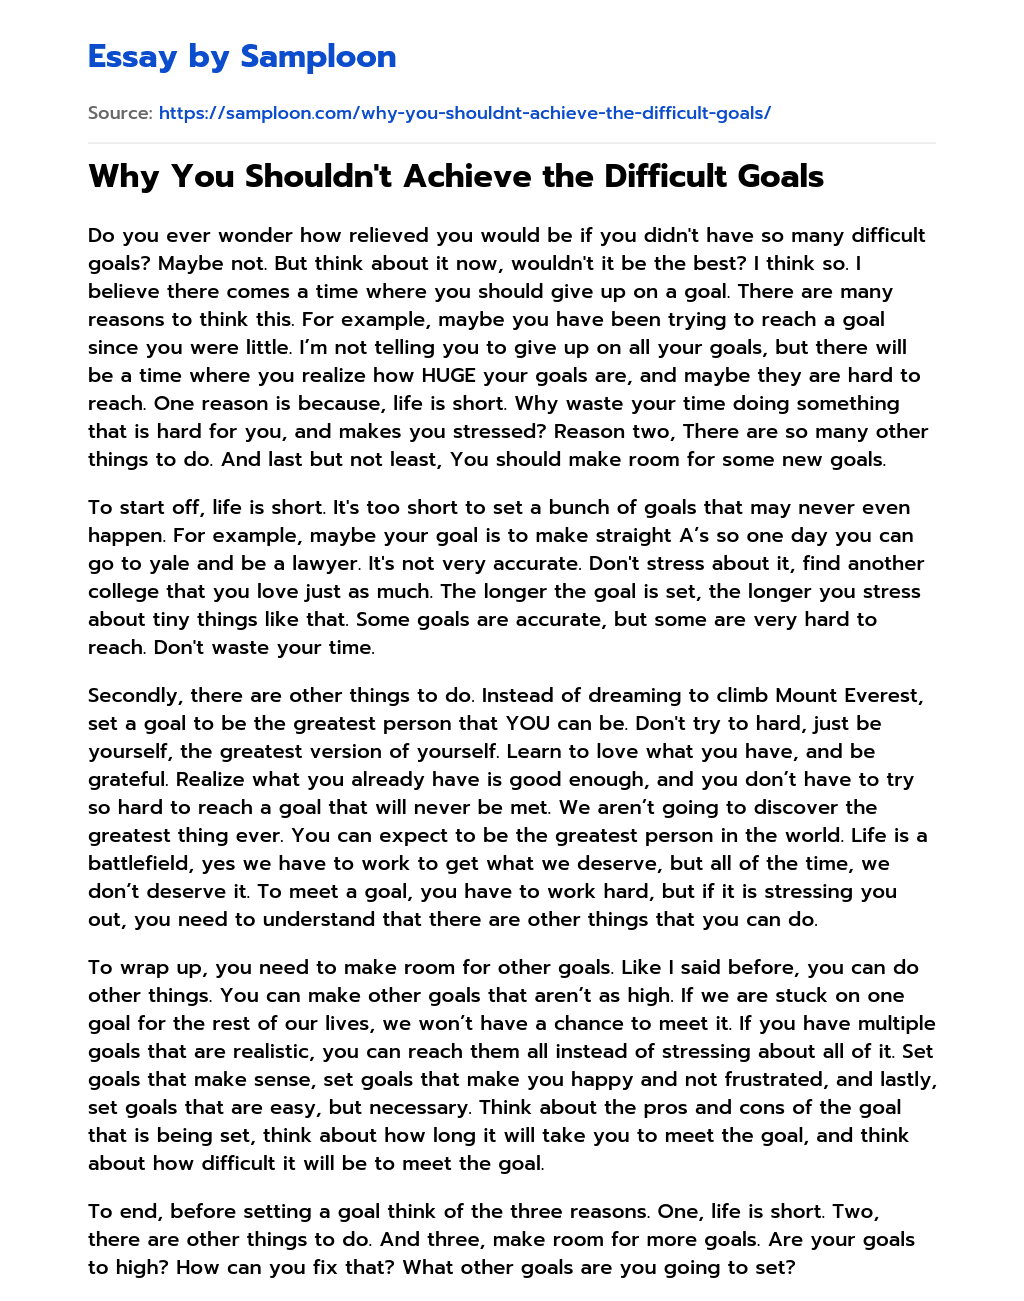 Why You Shouldn’t Achieve the Difficult Goals essay